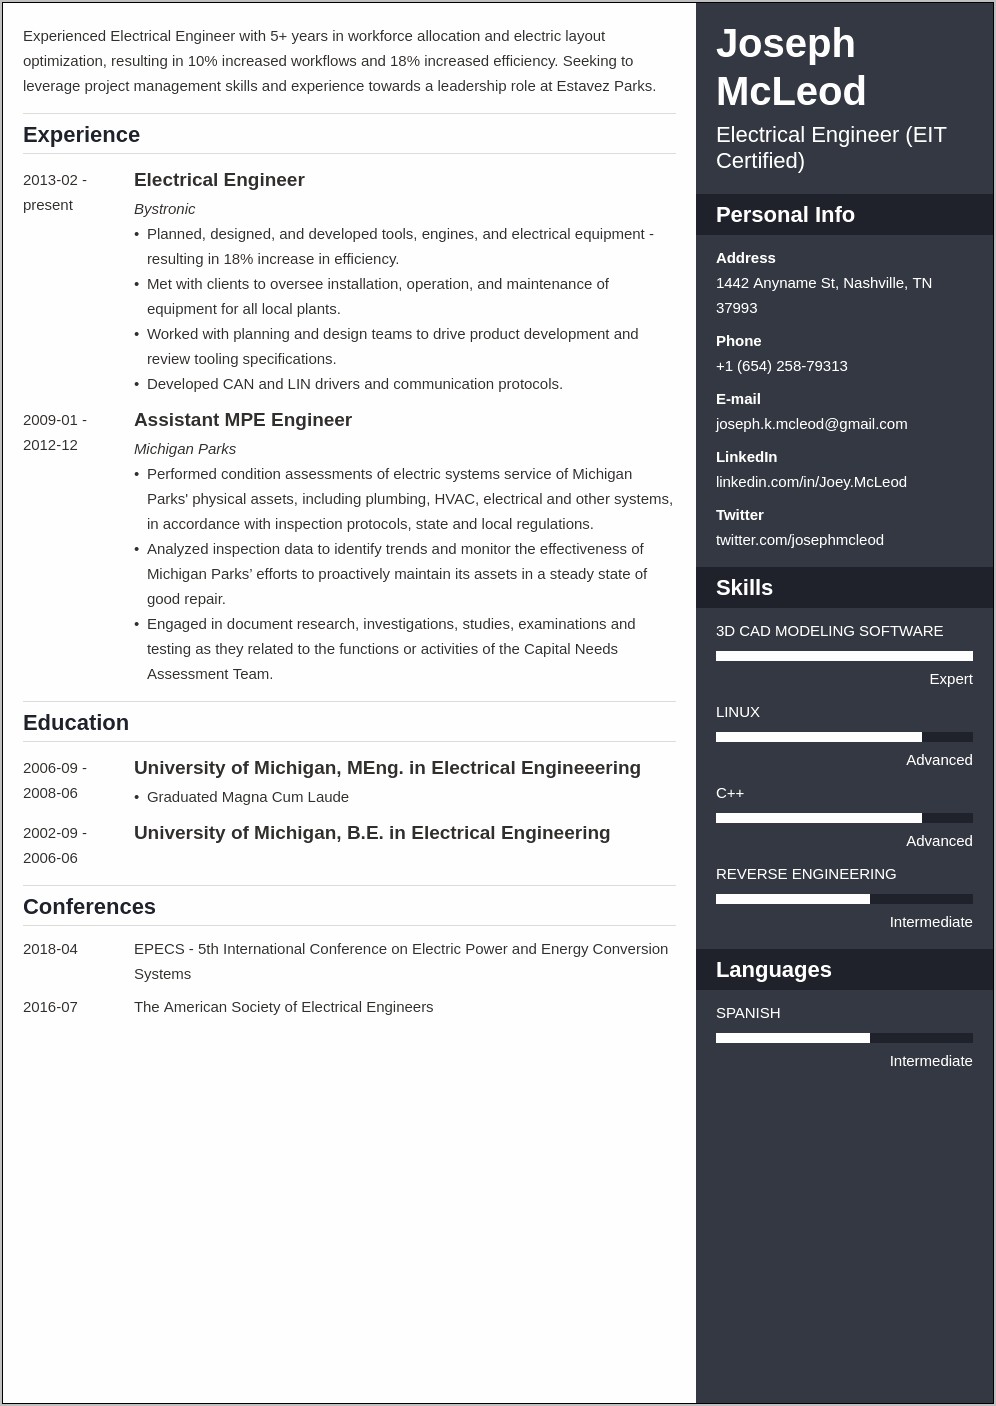 Experience Resume Sample For Electrical Engineer